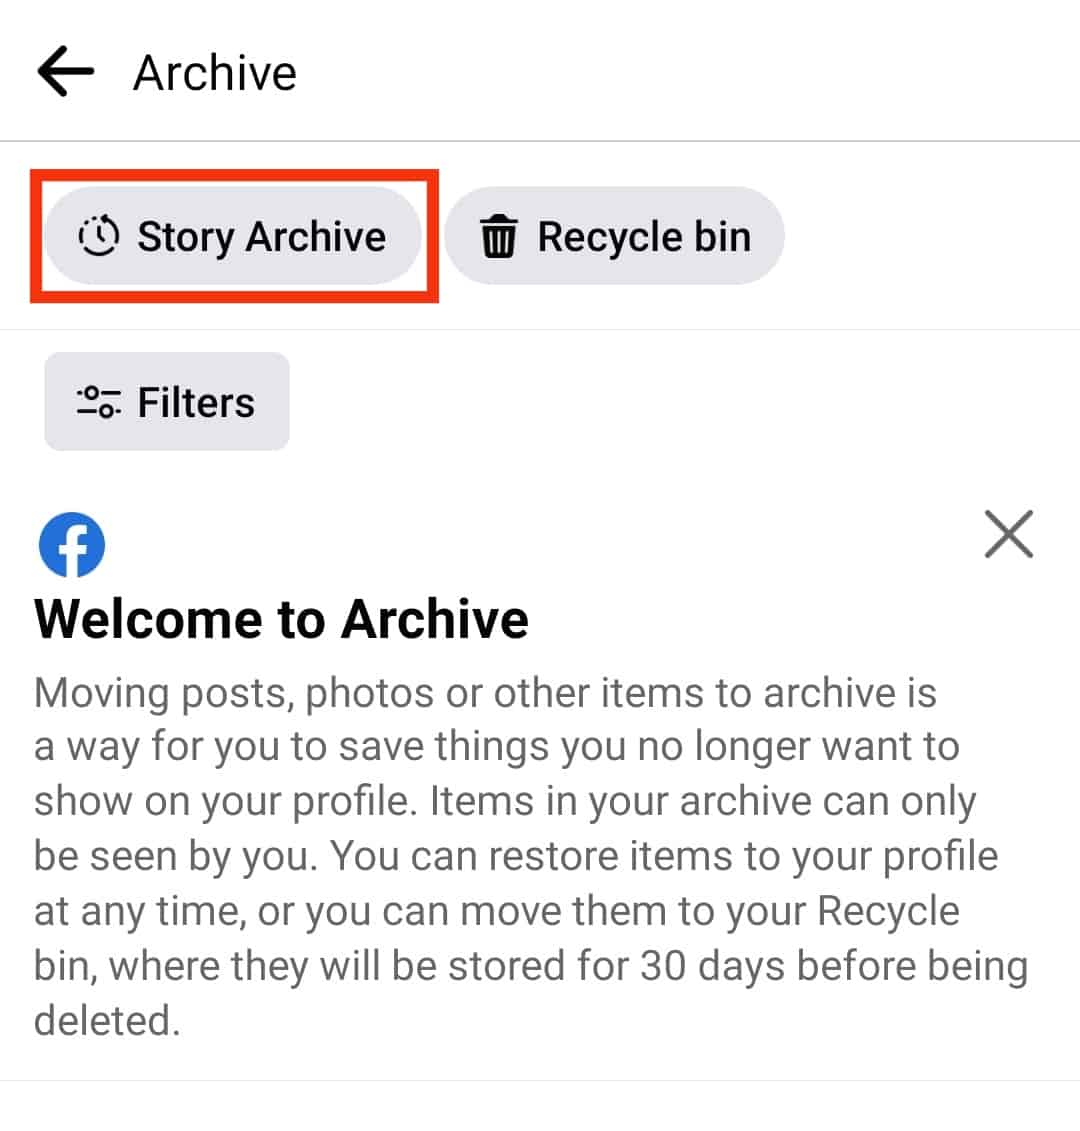 Tap On Story Archive